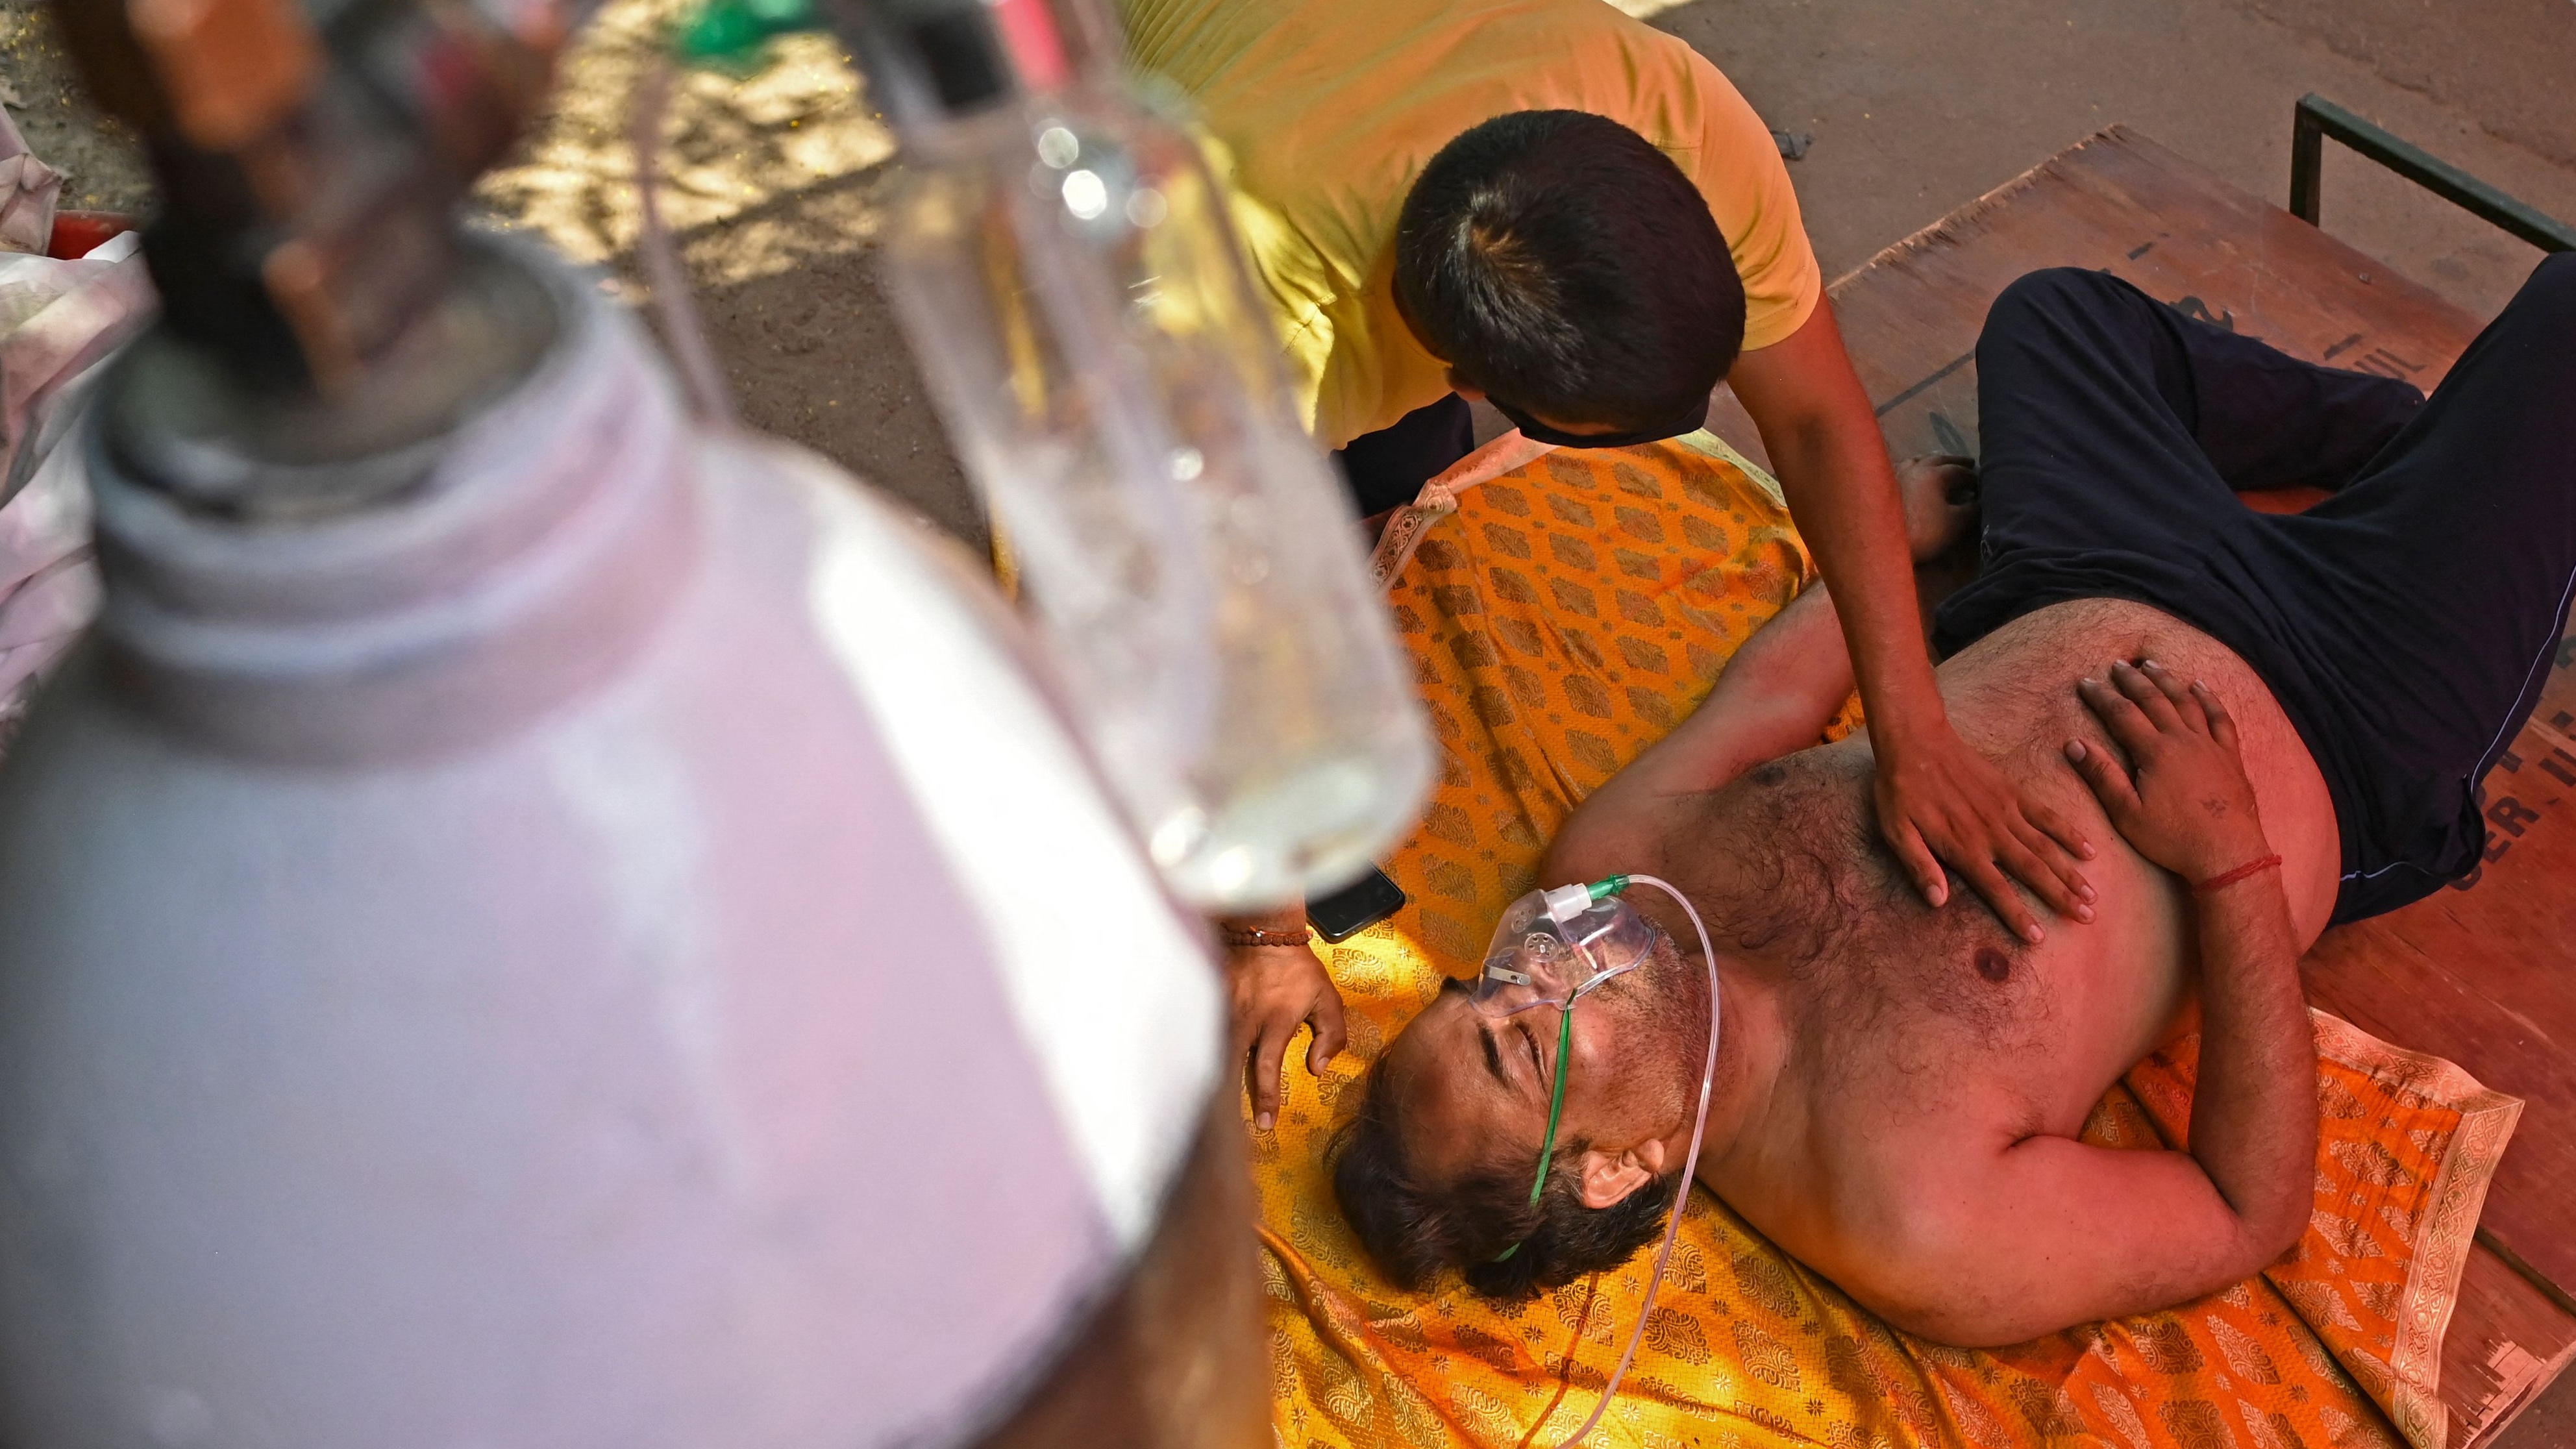 A Covid patient breathes with the help of oxygen in a tent outside a Sikh Gurdwara